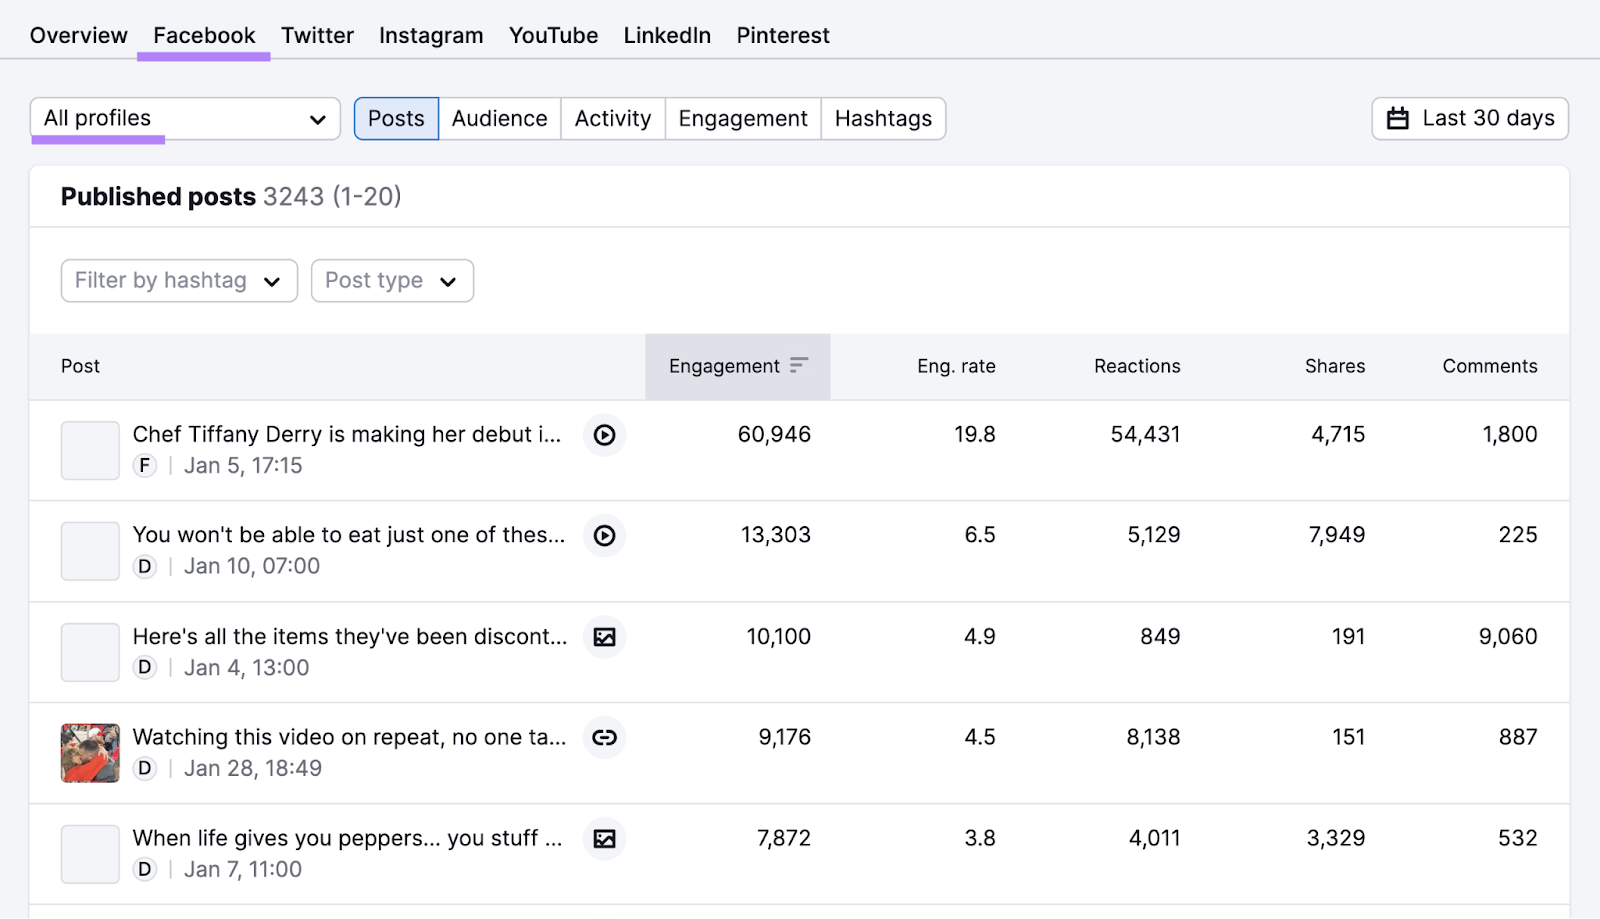 Published posts on Facebook overview in Social Tracker tool